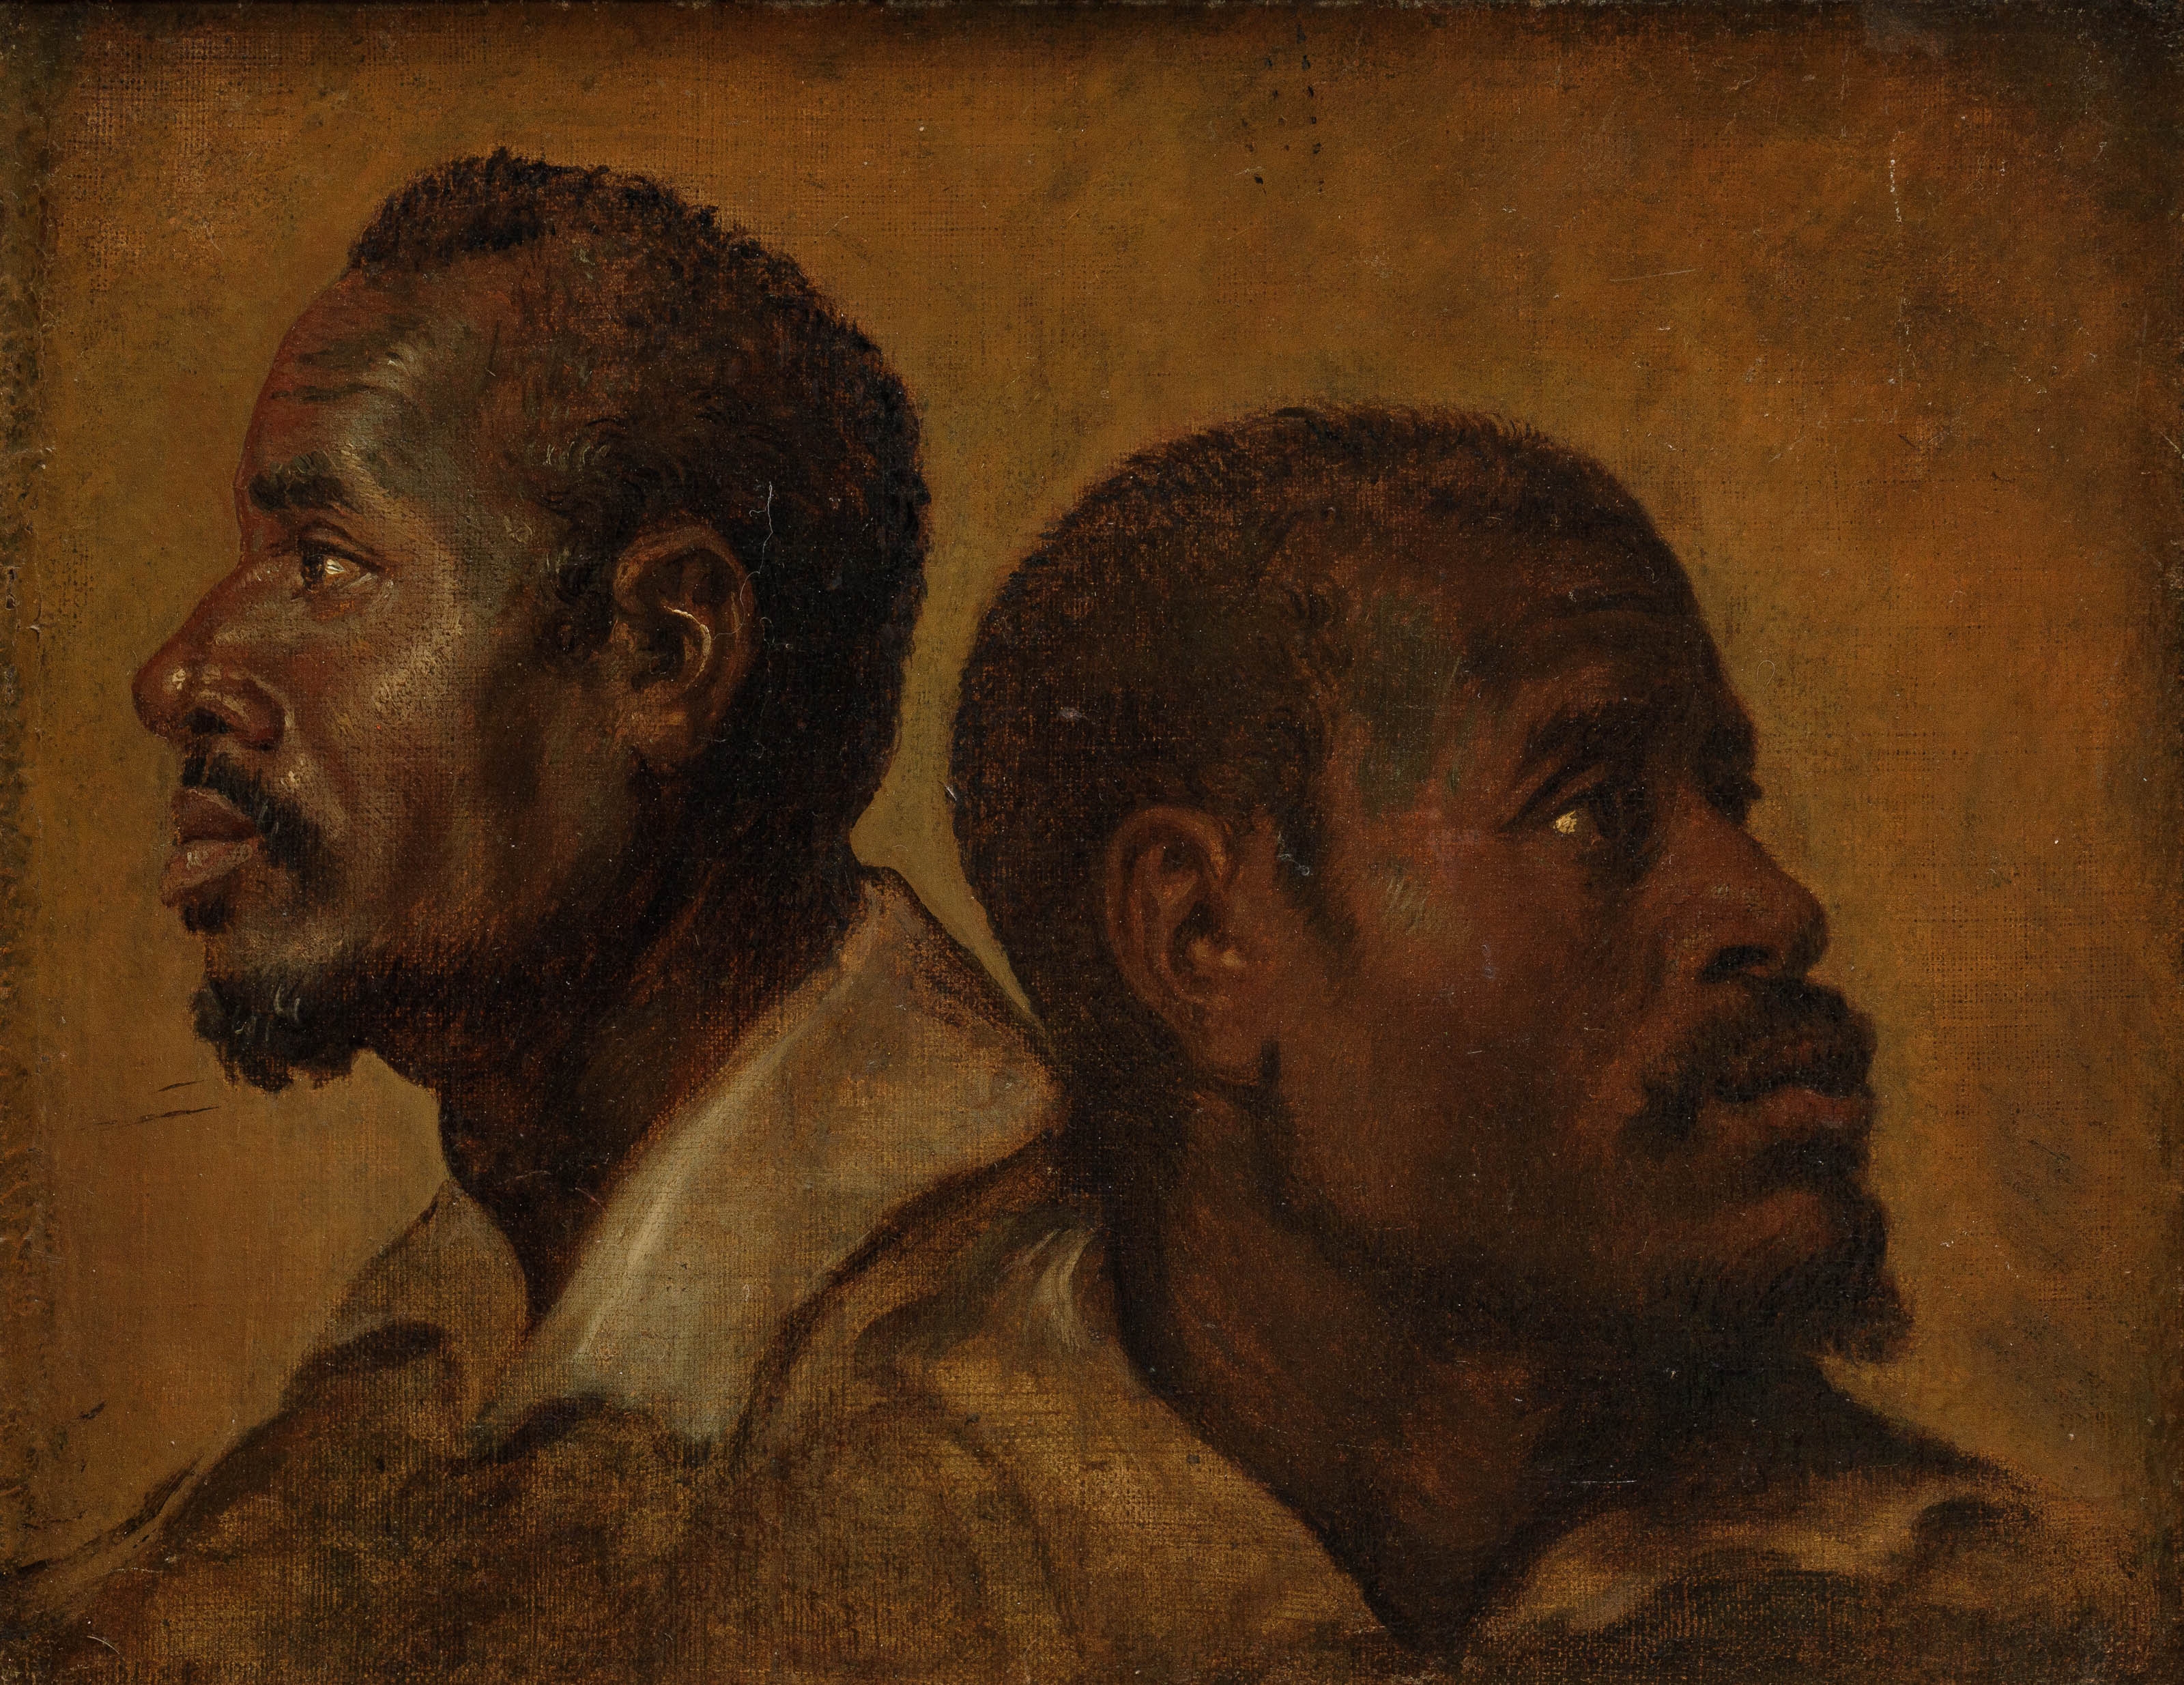 Artwork by Peter Paul Rubens, Two studies of the head of a Moor, Made of Oil on canvas